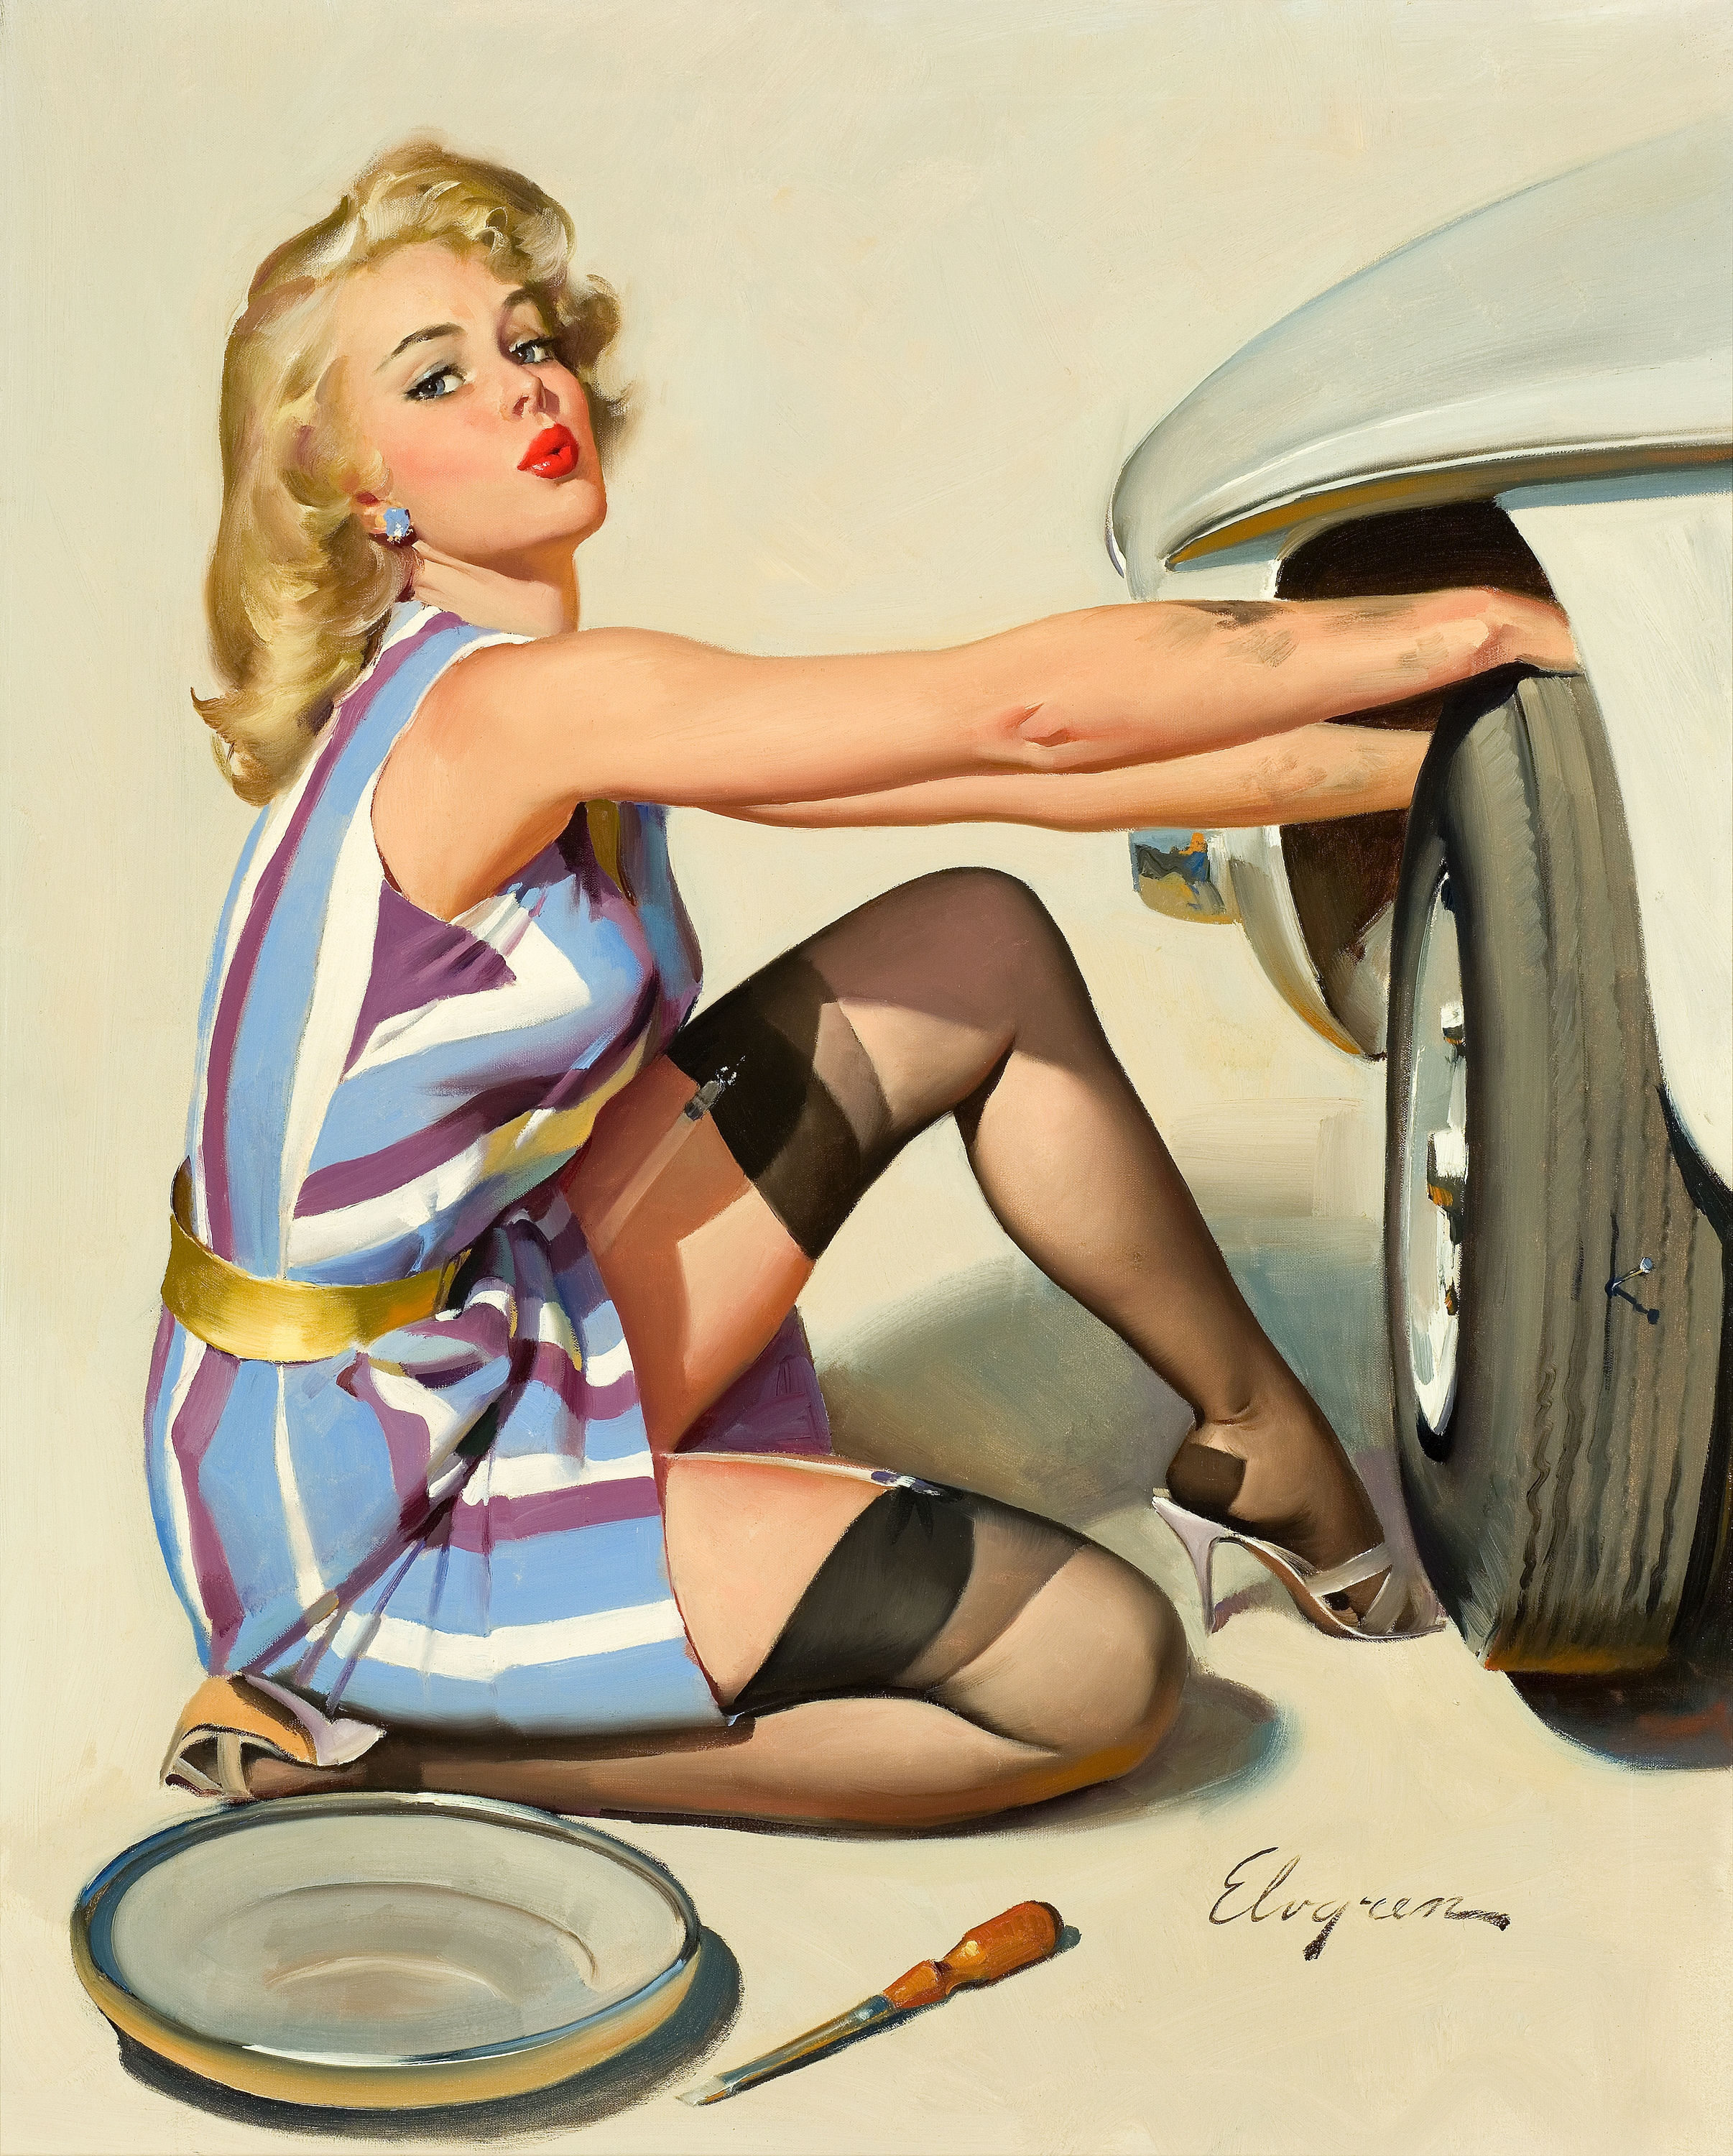 In the late 1930s Elvgren began to create calendar pin-ups in addition to h...